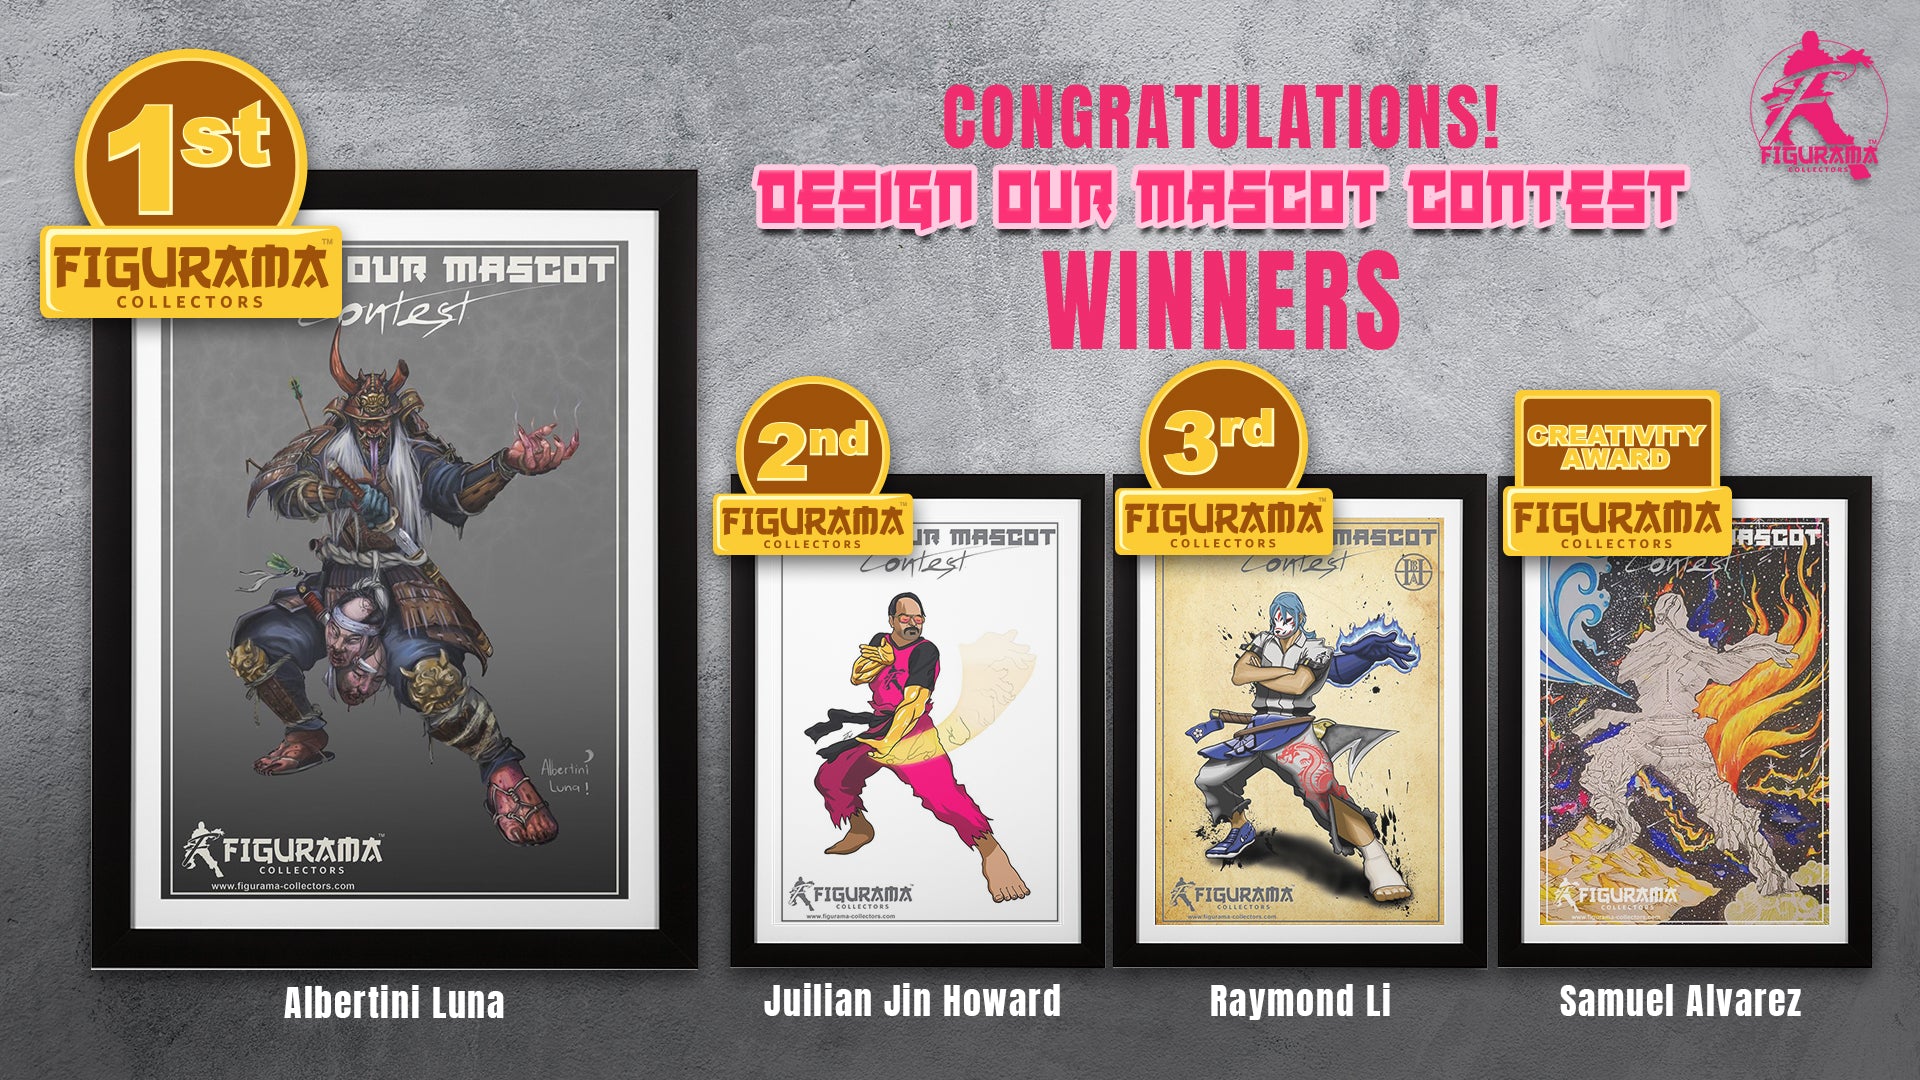 Design our Mascot Contest Winners!